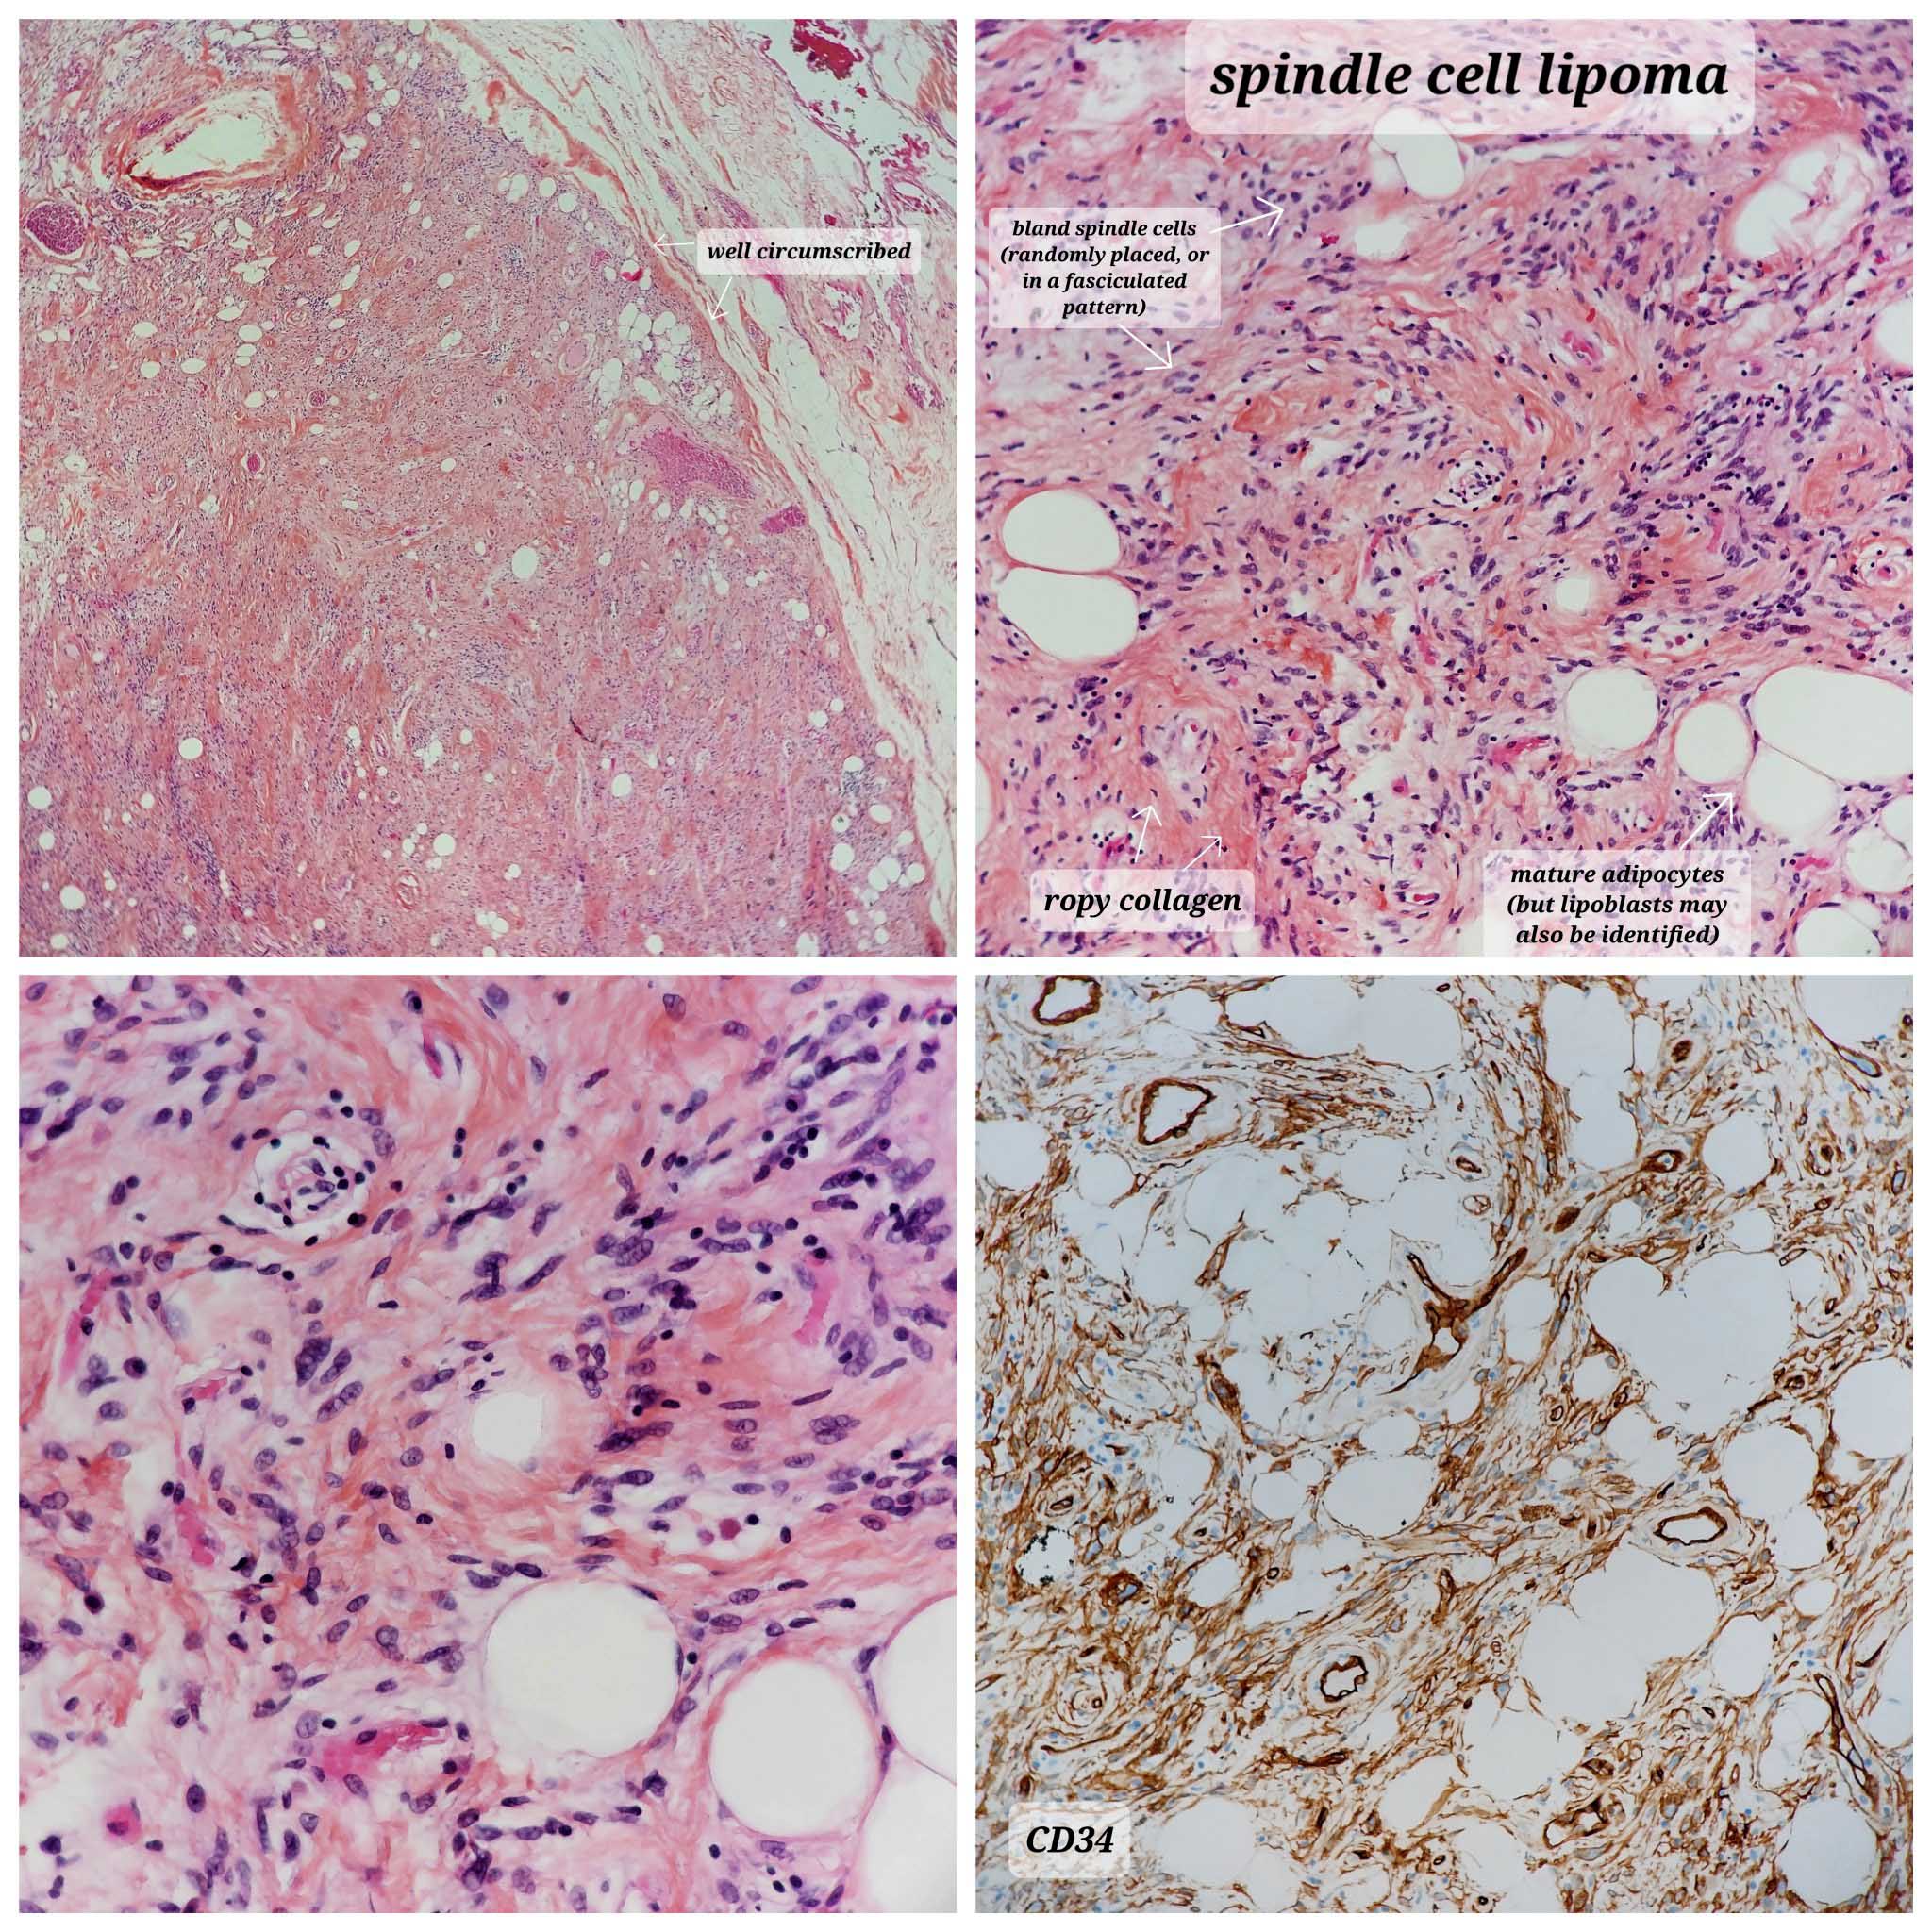 Spindle cell / pleomorphic lipoma